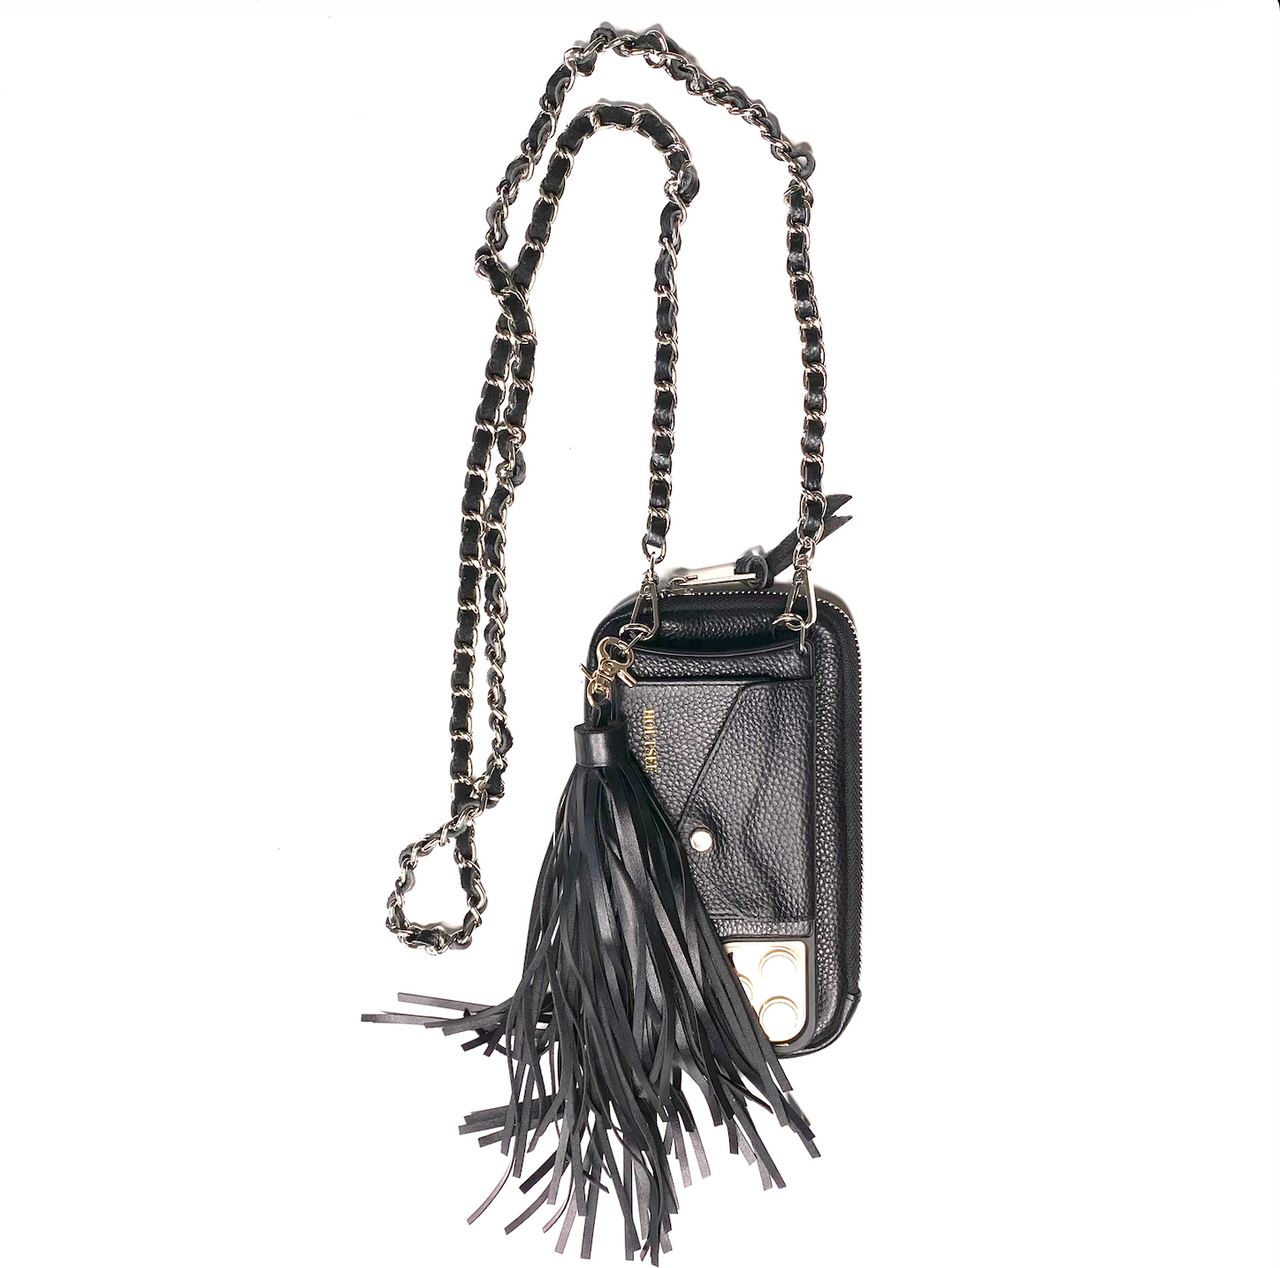 Goddess Iphone Case + Pouch + Removable Tassel